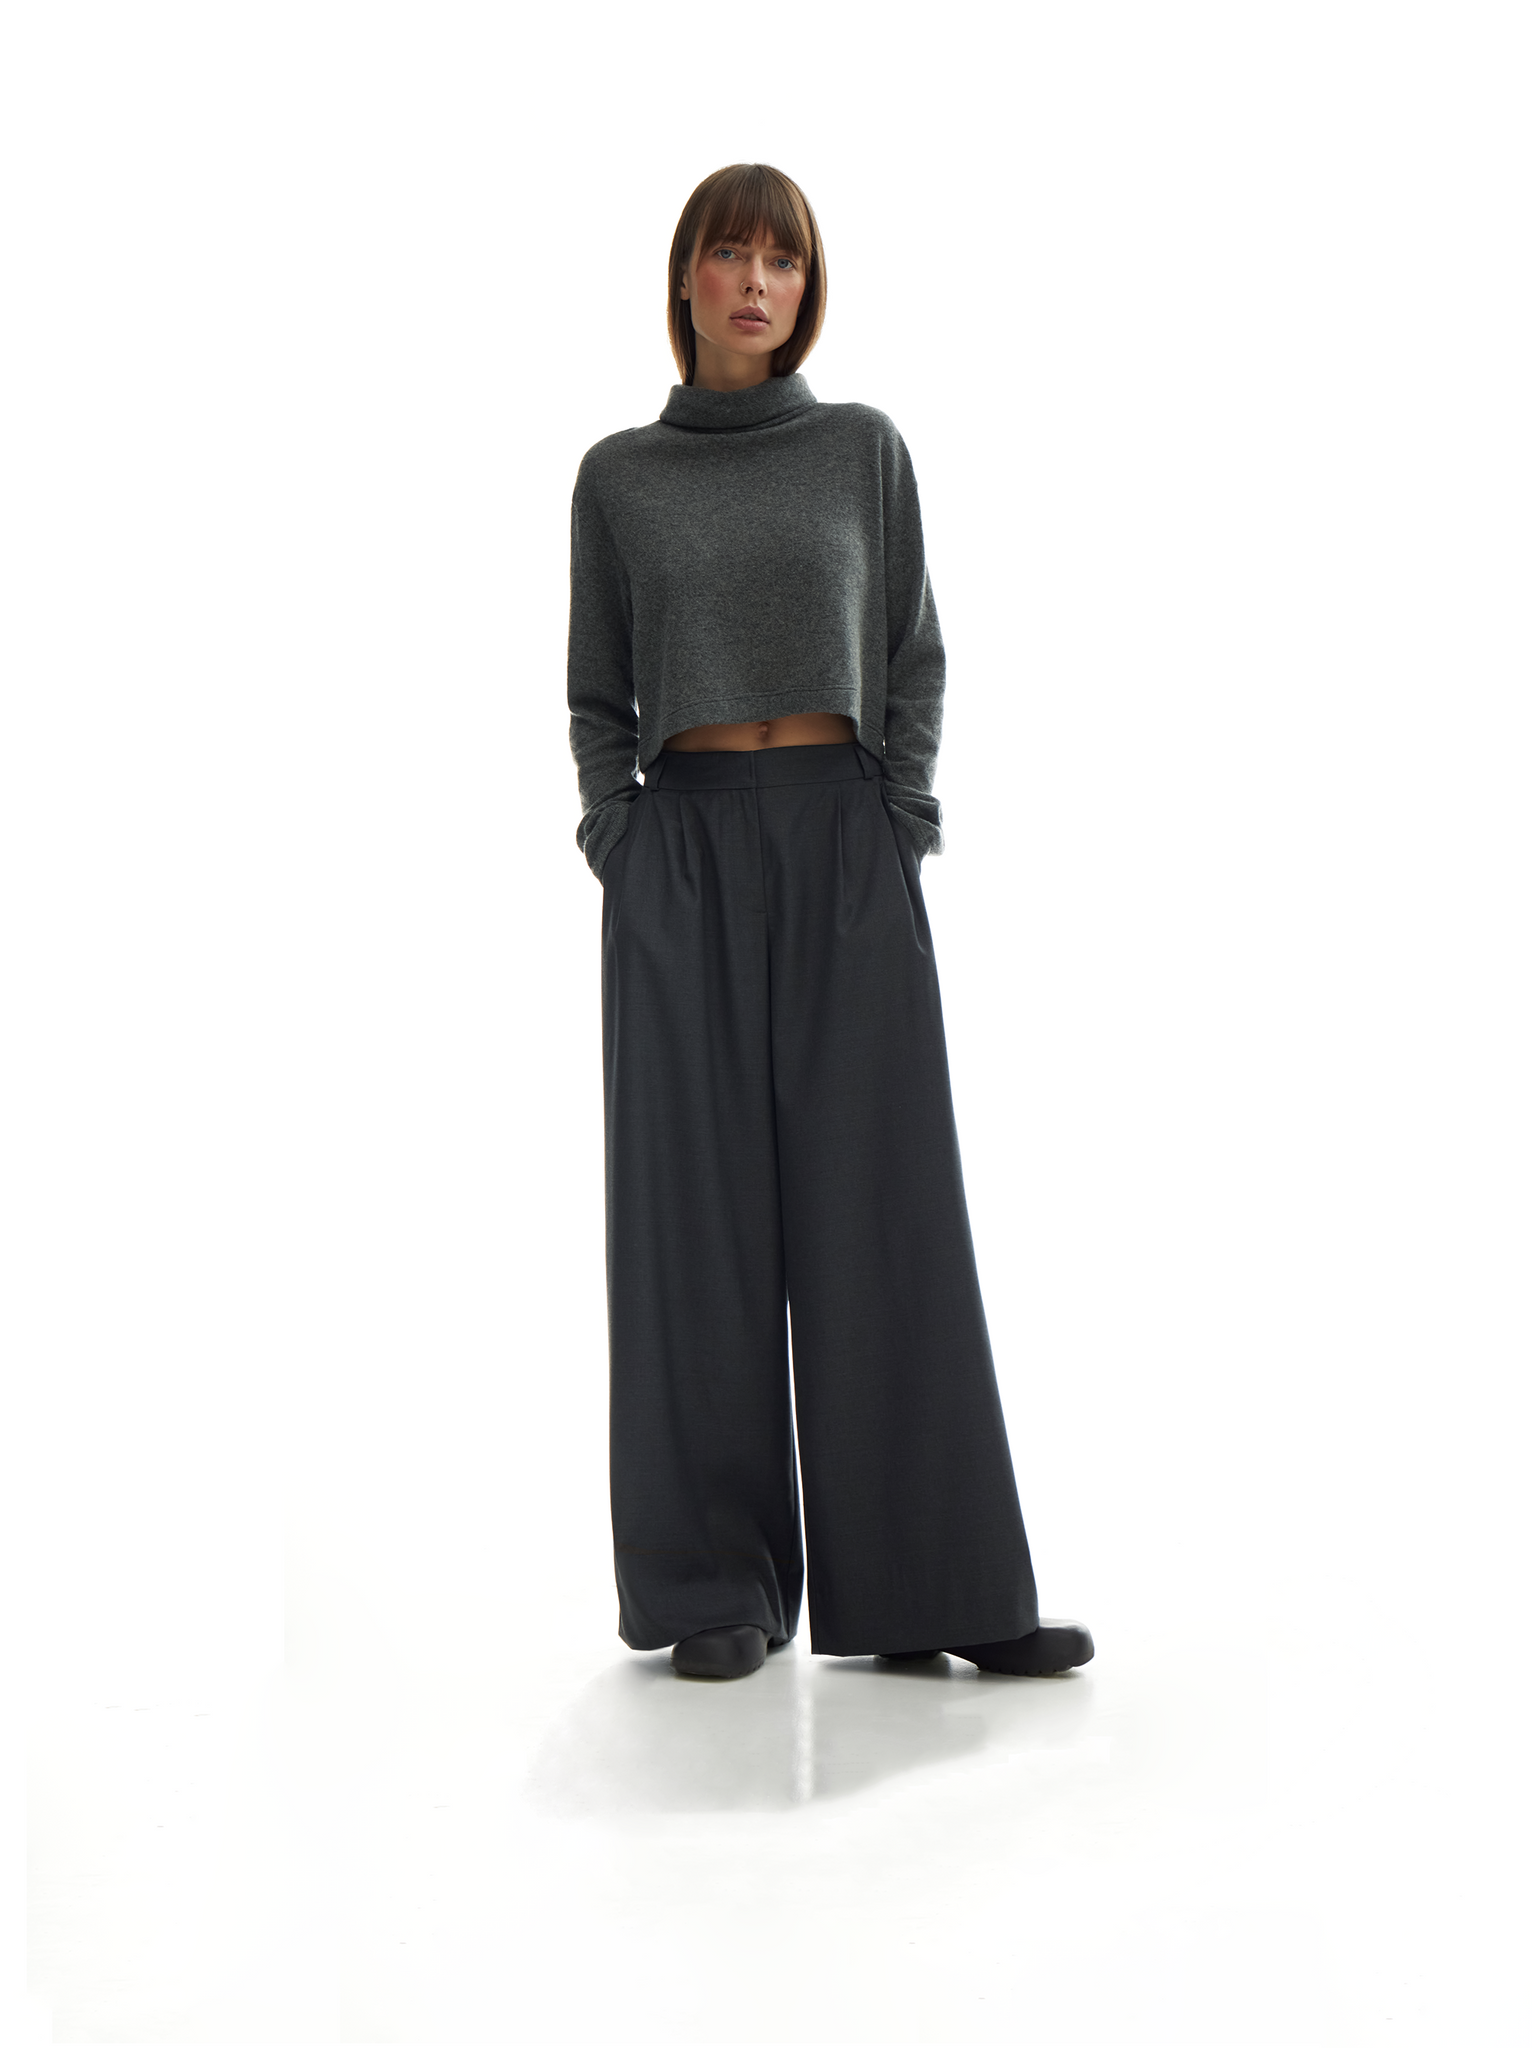 orla knit crop top in charcoal